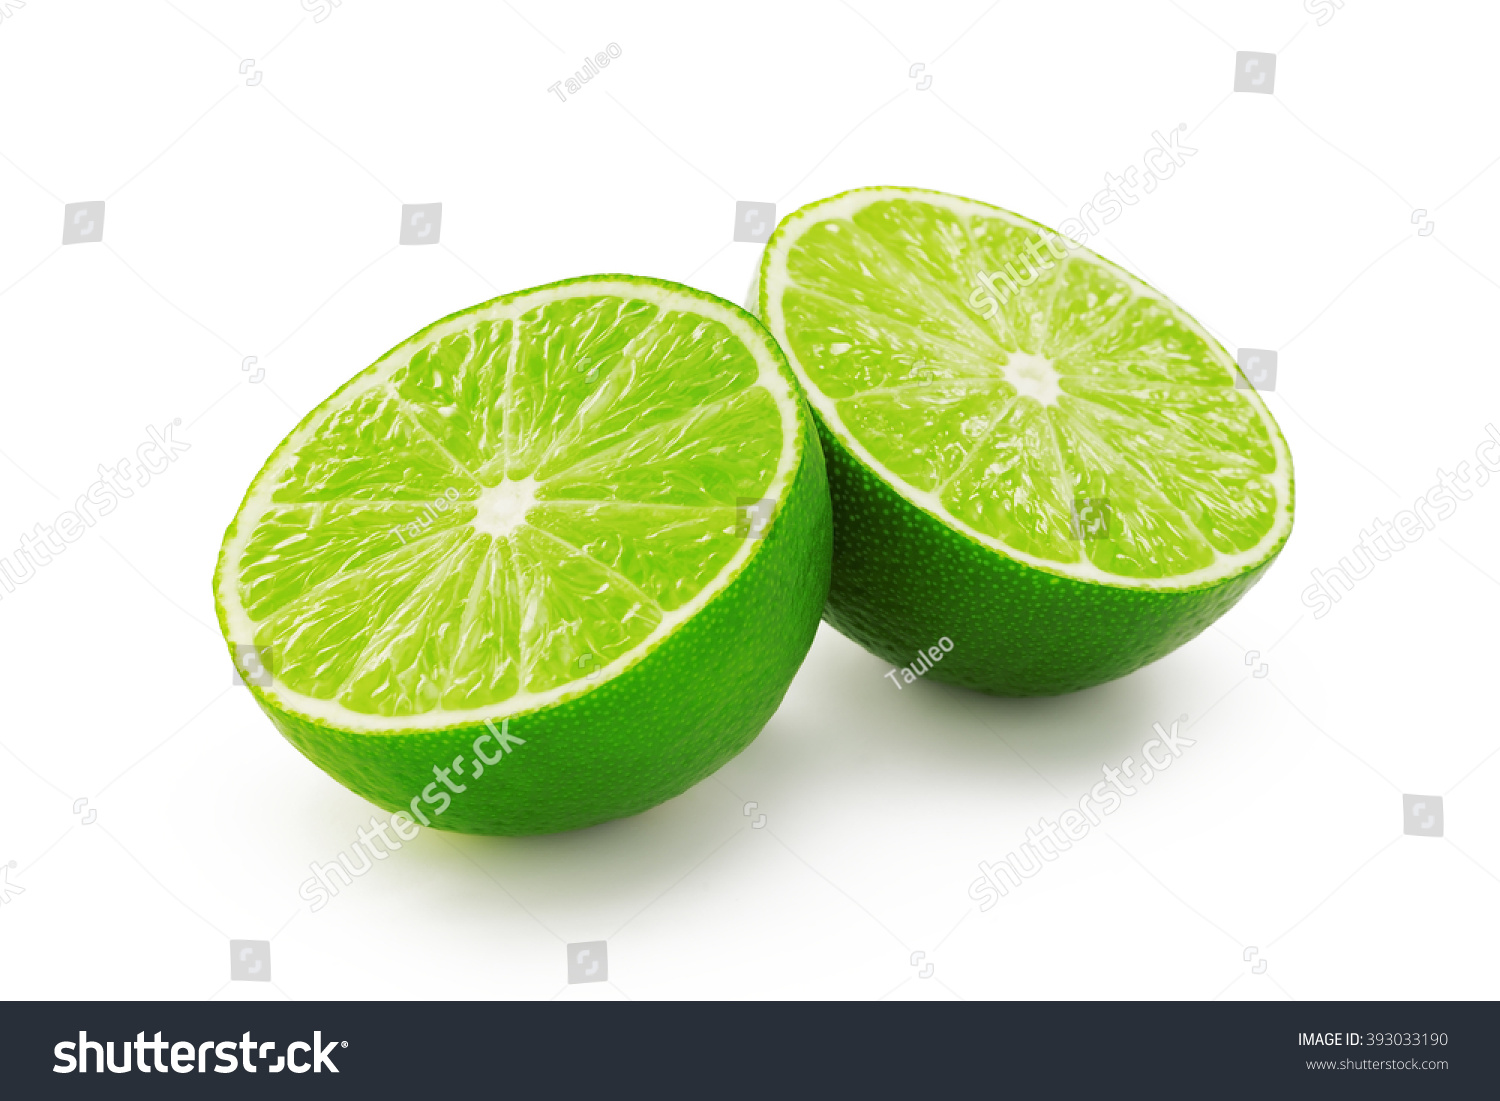 Lime slices isolated on white background #393033190